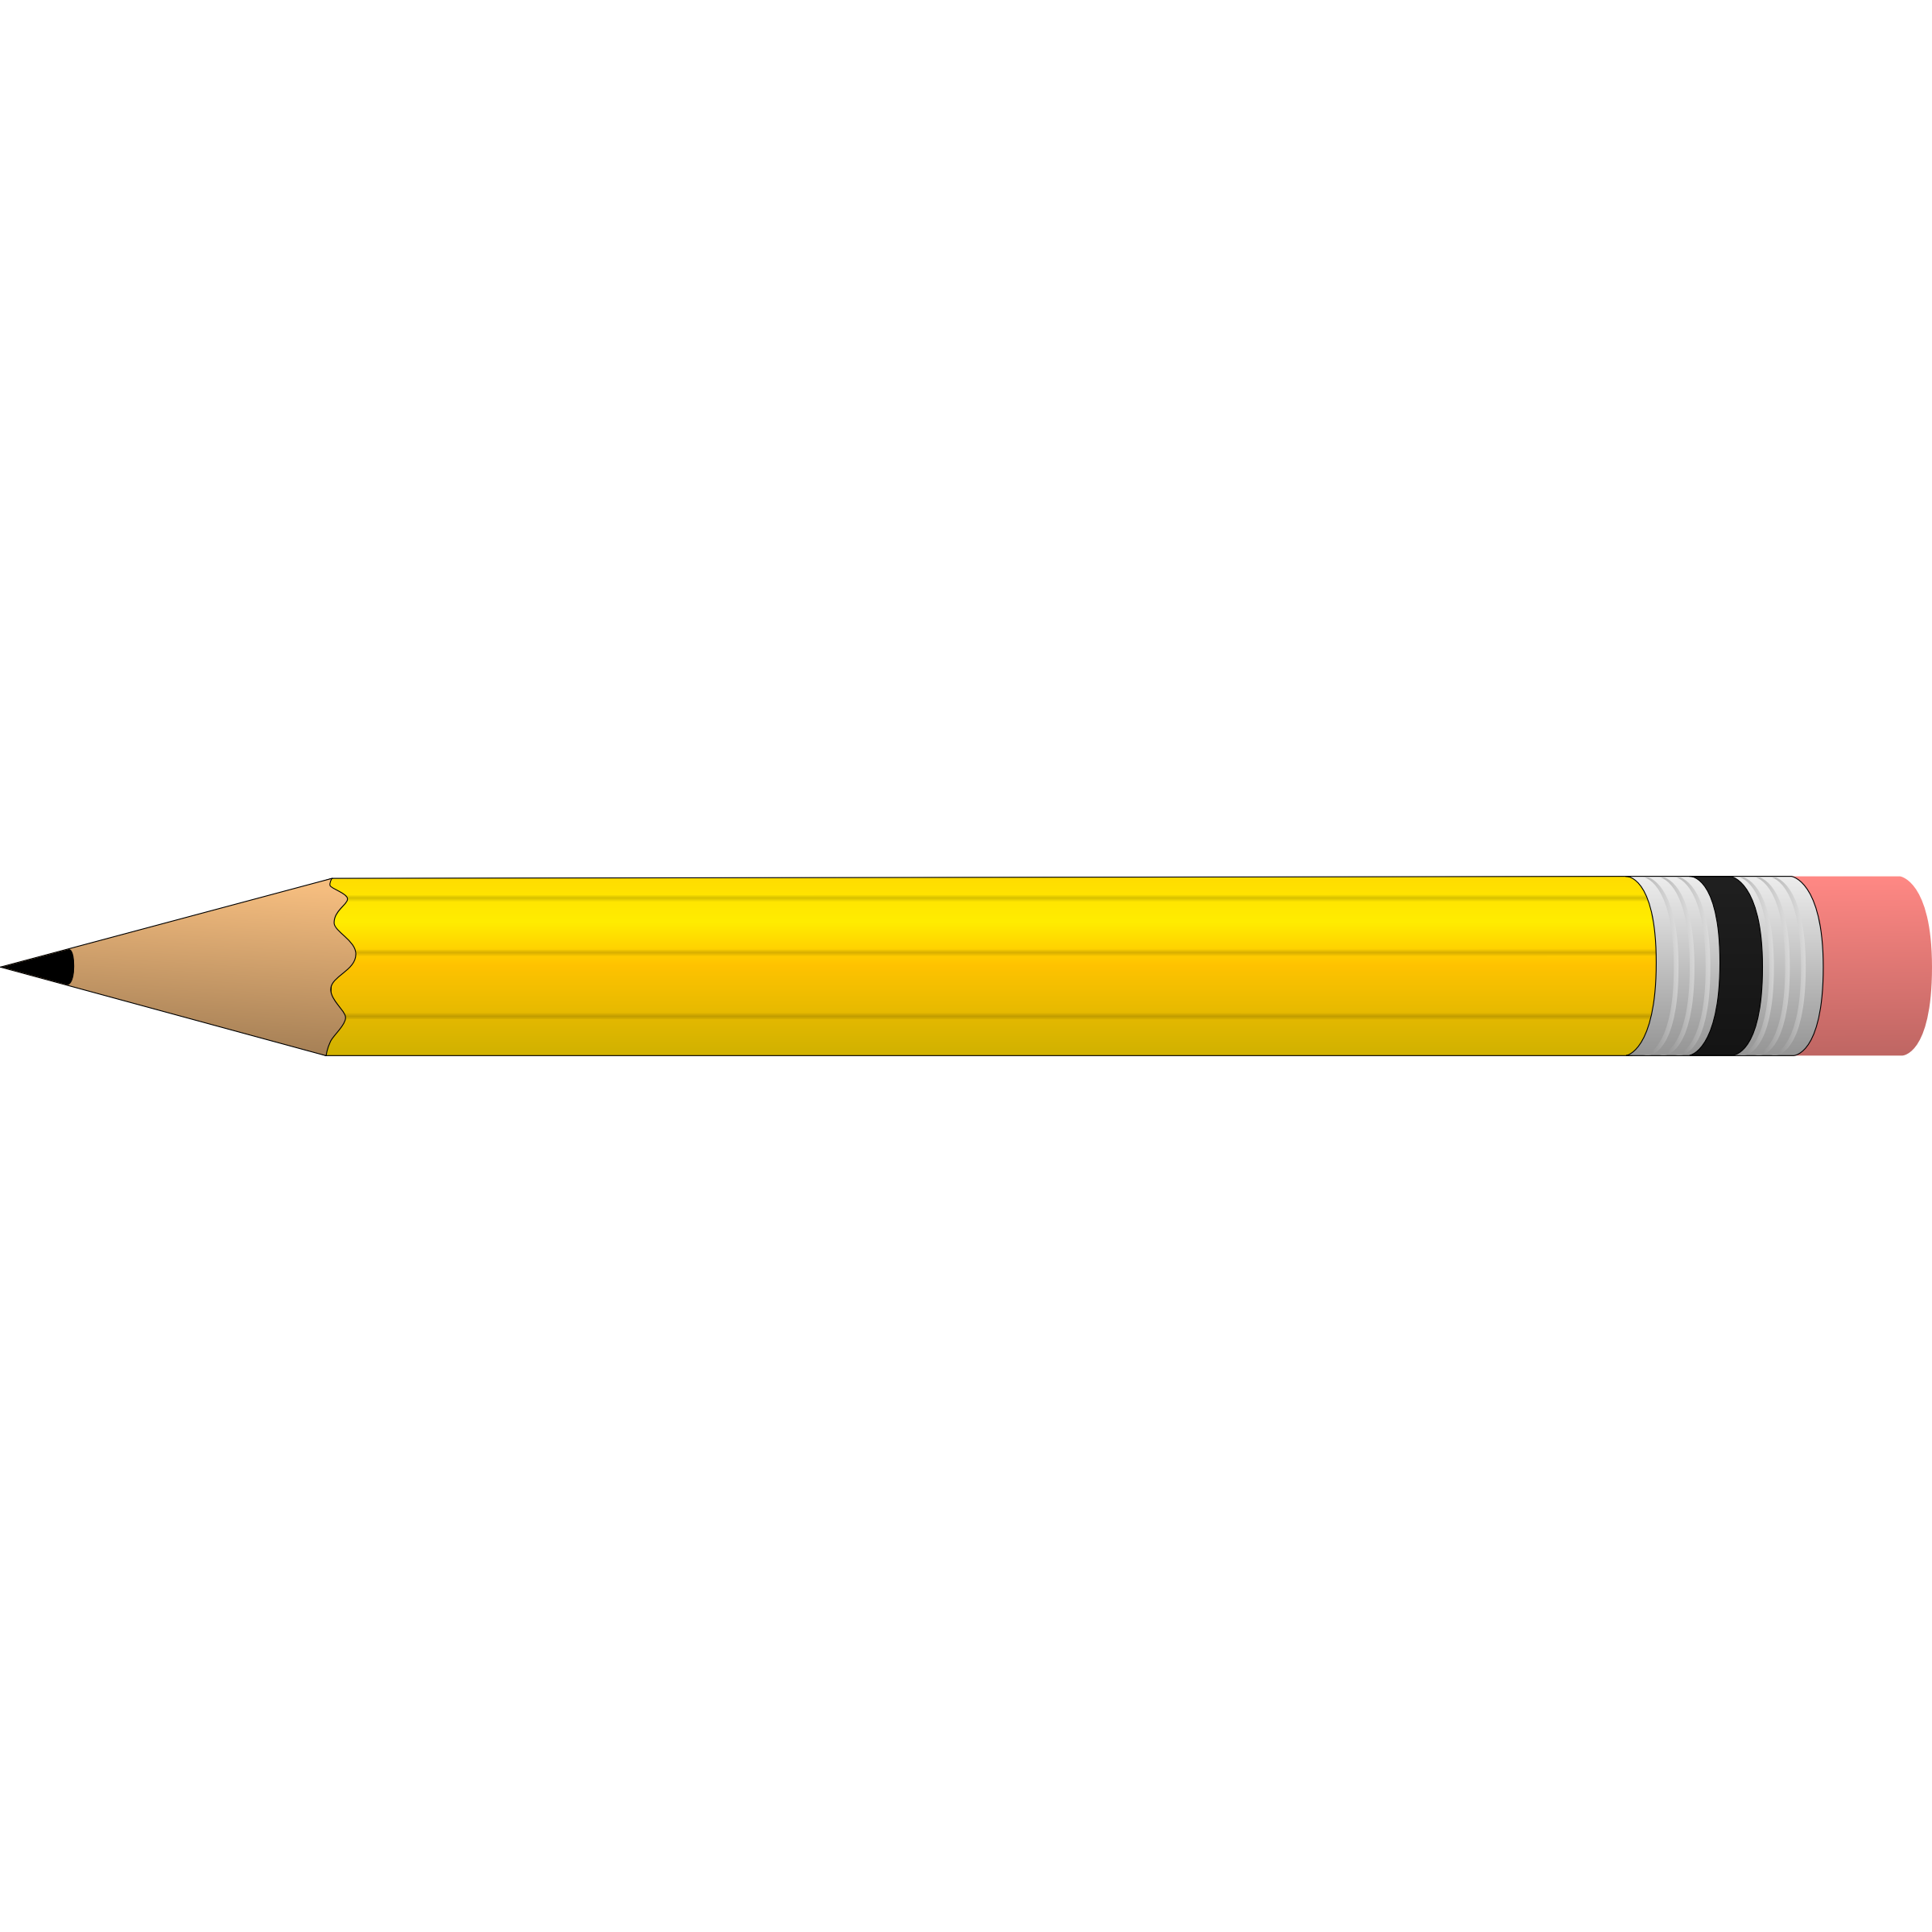 Top Pencil For Image Download Png Clipart